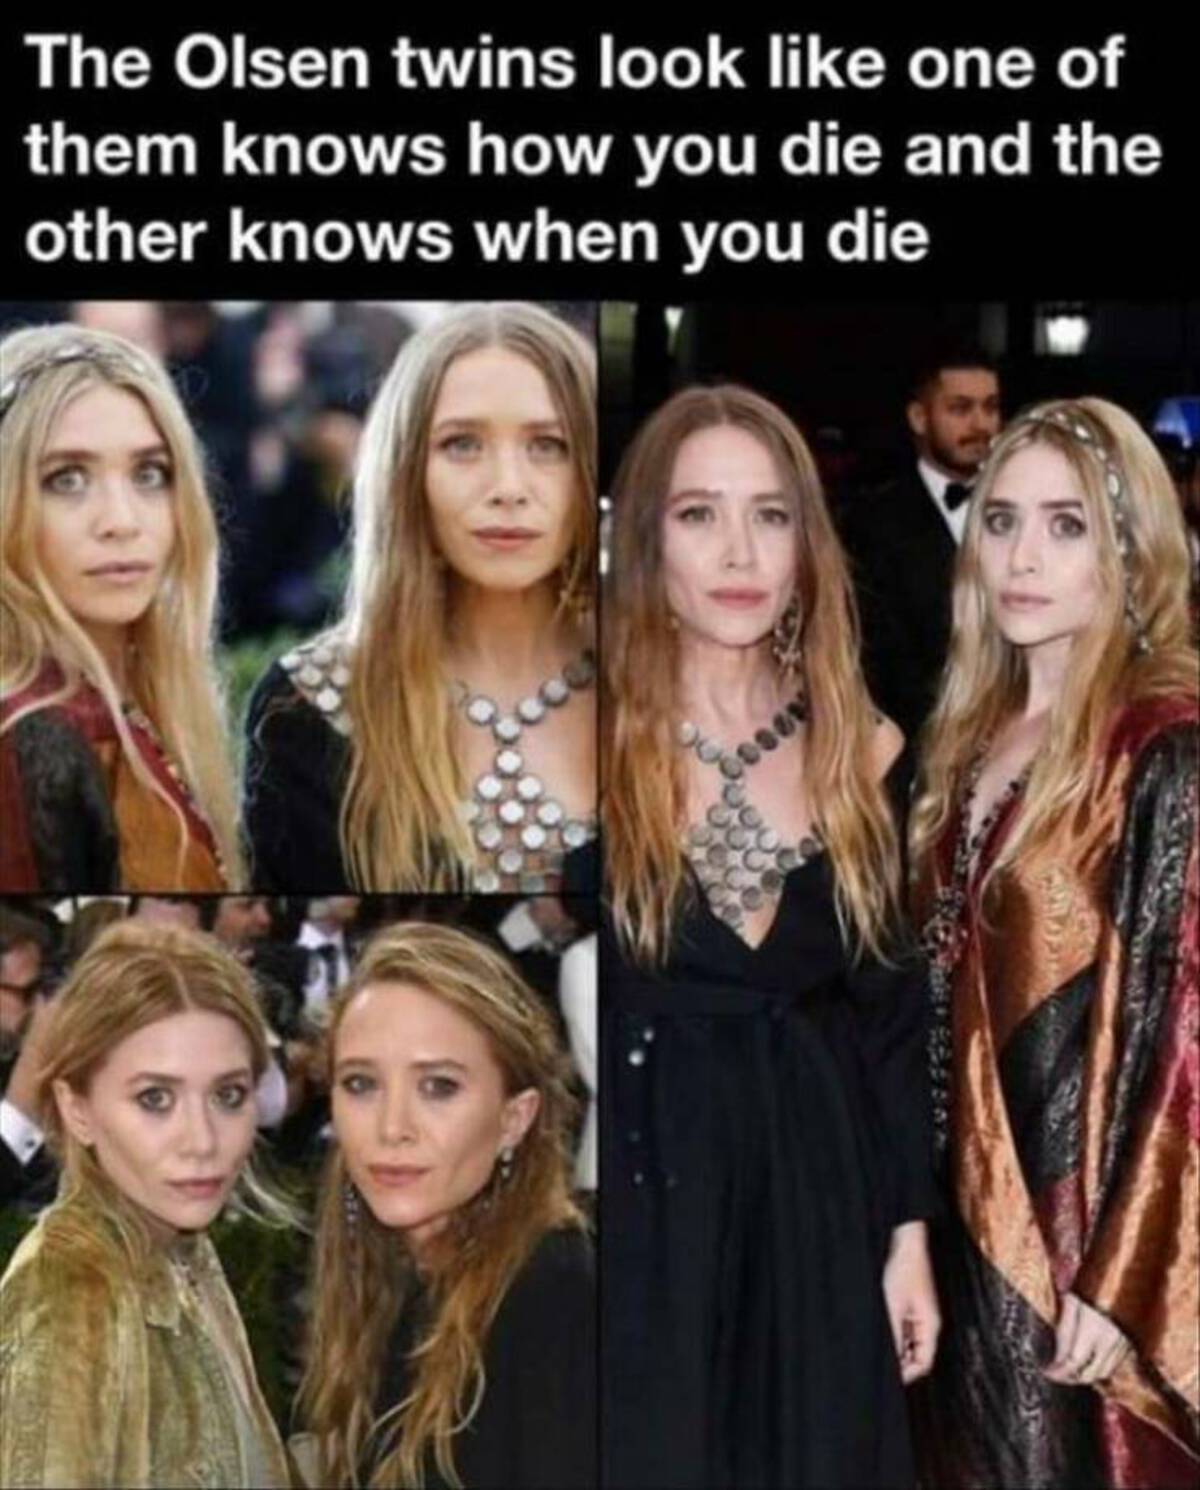 olsen twins how when you die - The Olsen twins look one of them knows how you die and the other knows when you die